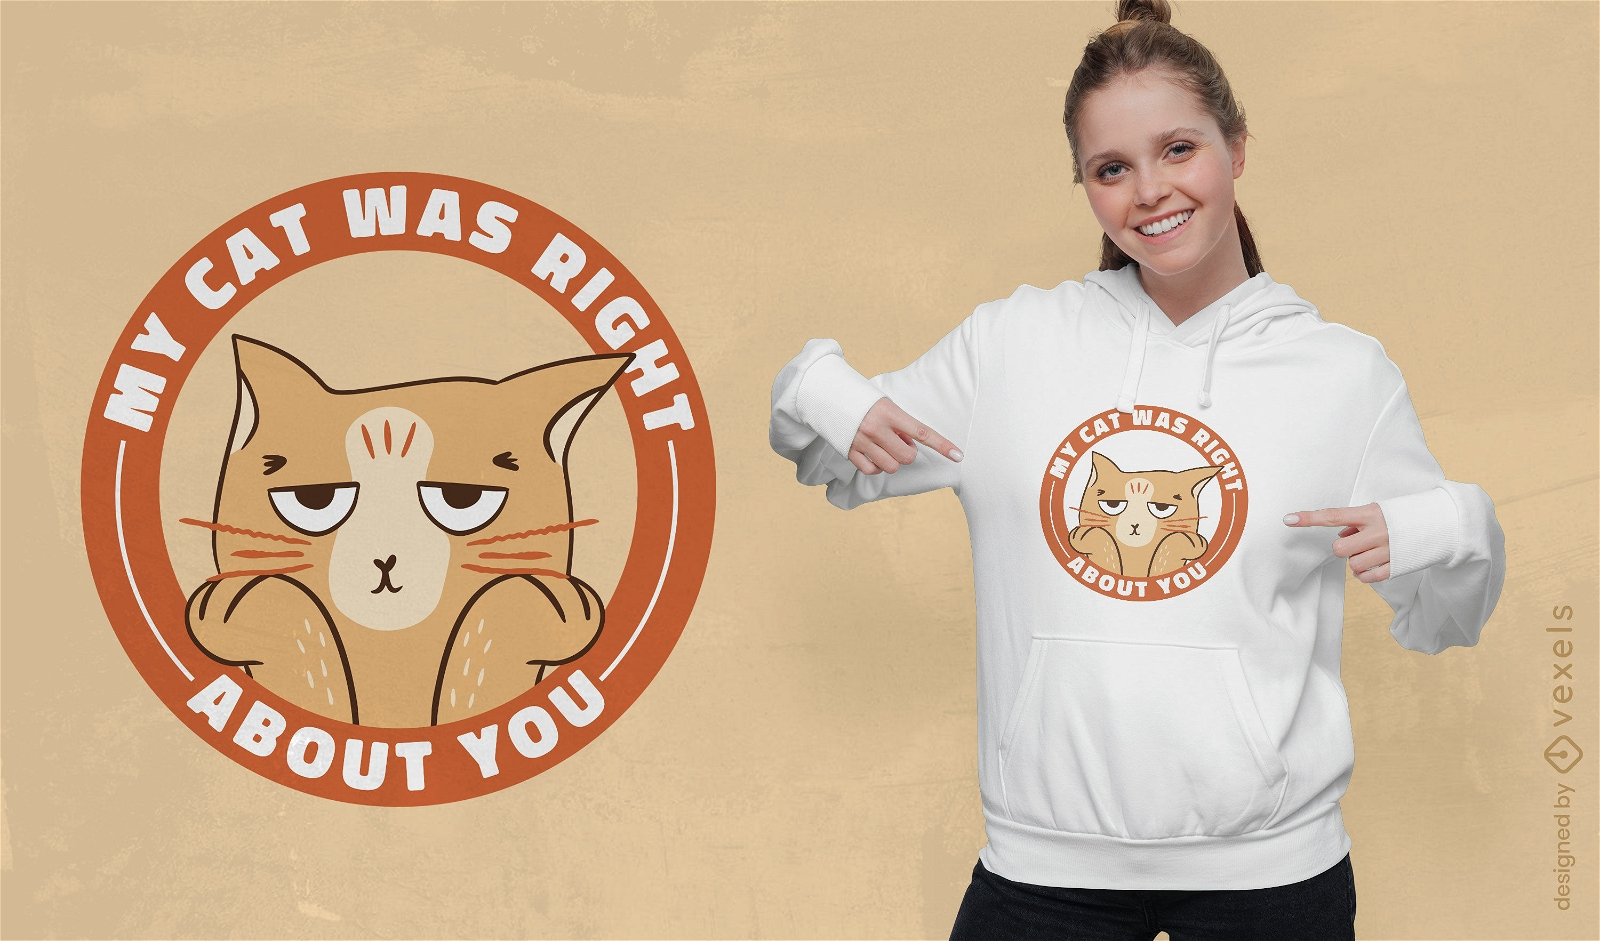 My cat was right about you t-shirt design